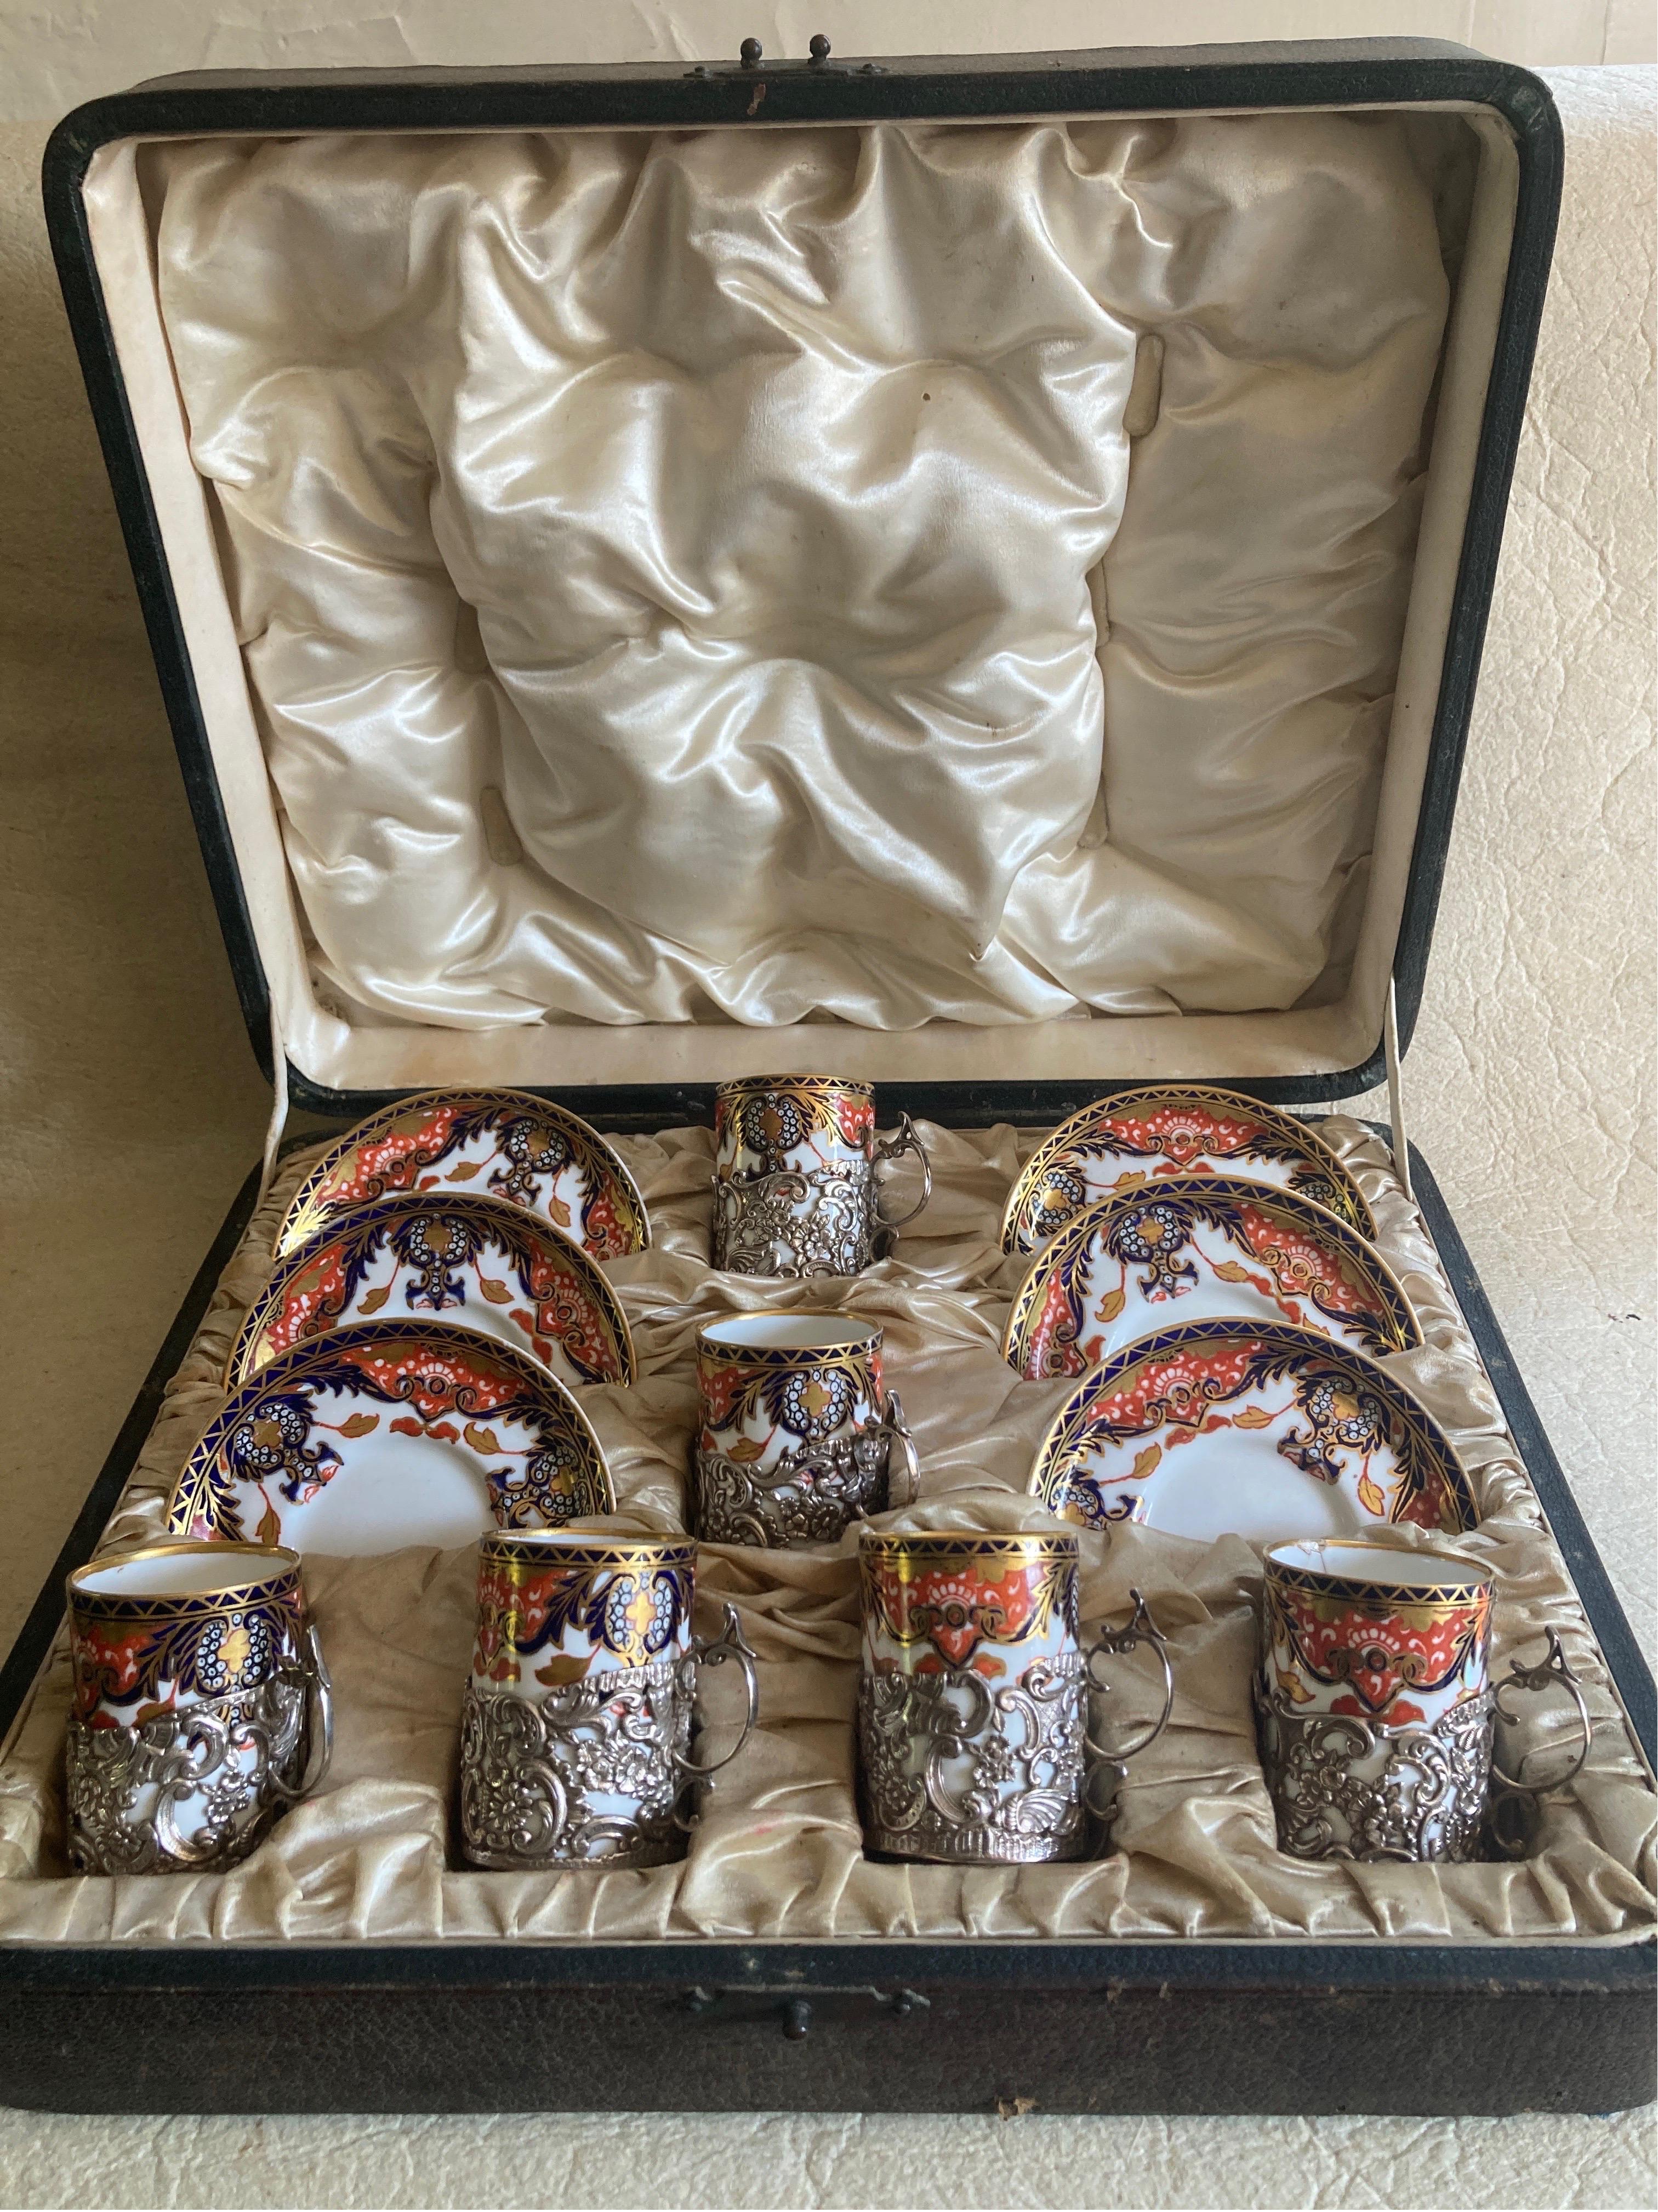 An exquisite Imari style collection of six silver holders with six cups & saucers, in great antique condition with no chips, cracks, crazing or restoration, no sign of wear on the silver holder and only ever used once. Circa 1920 (silver holders